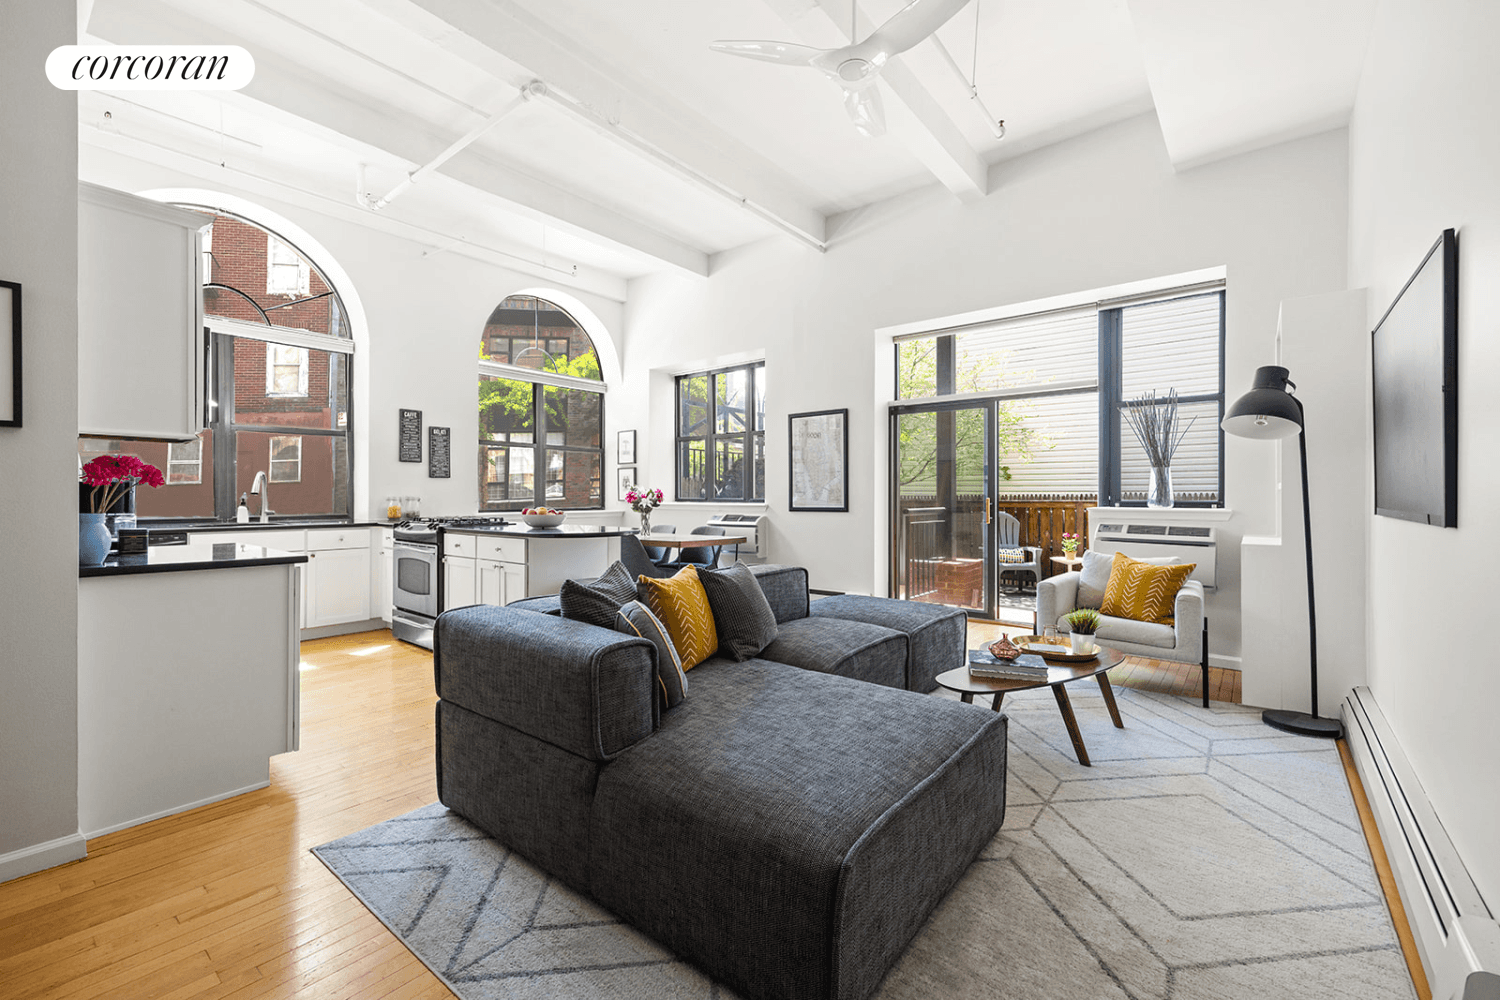 This sprawling, one of a kind three bedroom, two bath loft apartment offers over 1425 square feet of living space plus a 400 square foot PRIVATE GARDEN PATIO.